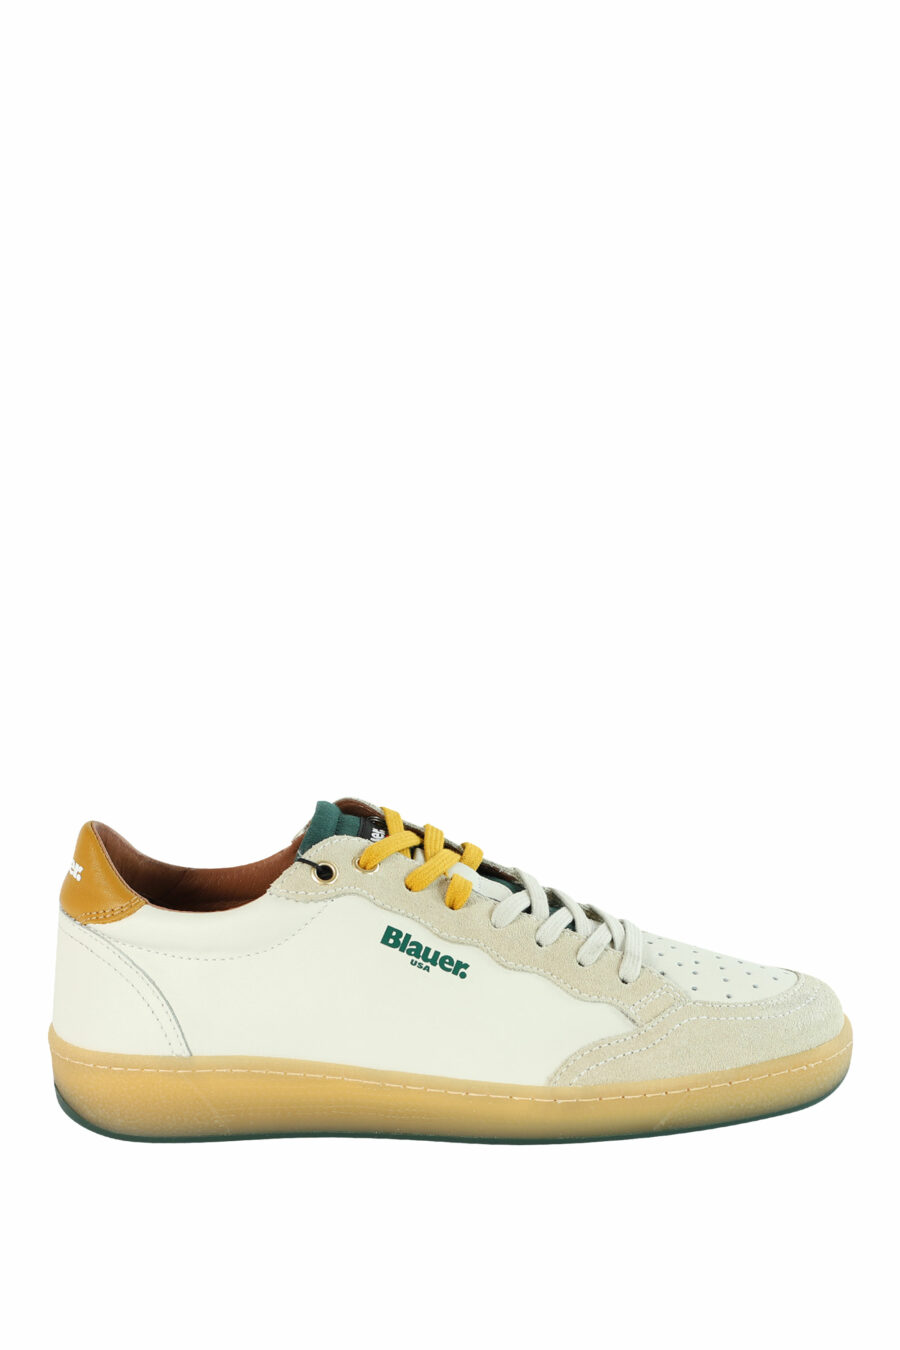 White "MURRAY" trainers with green and yellow details - 8058156497566